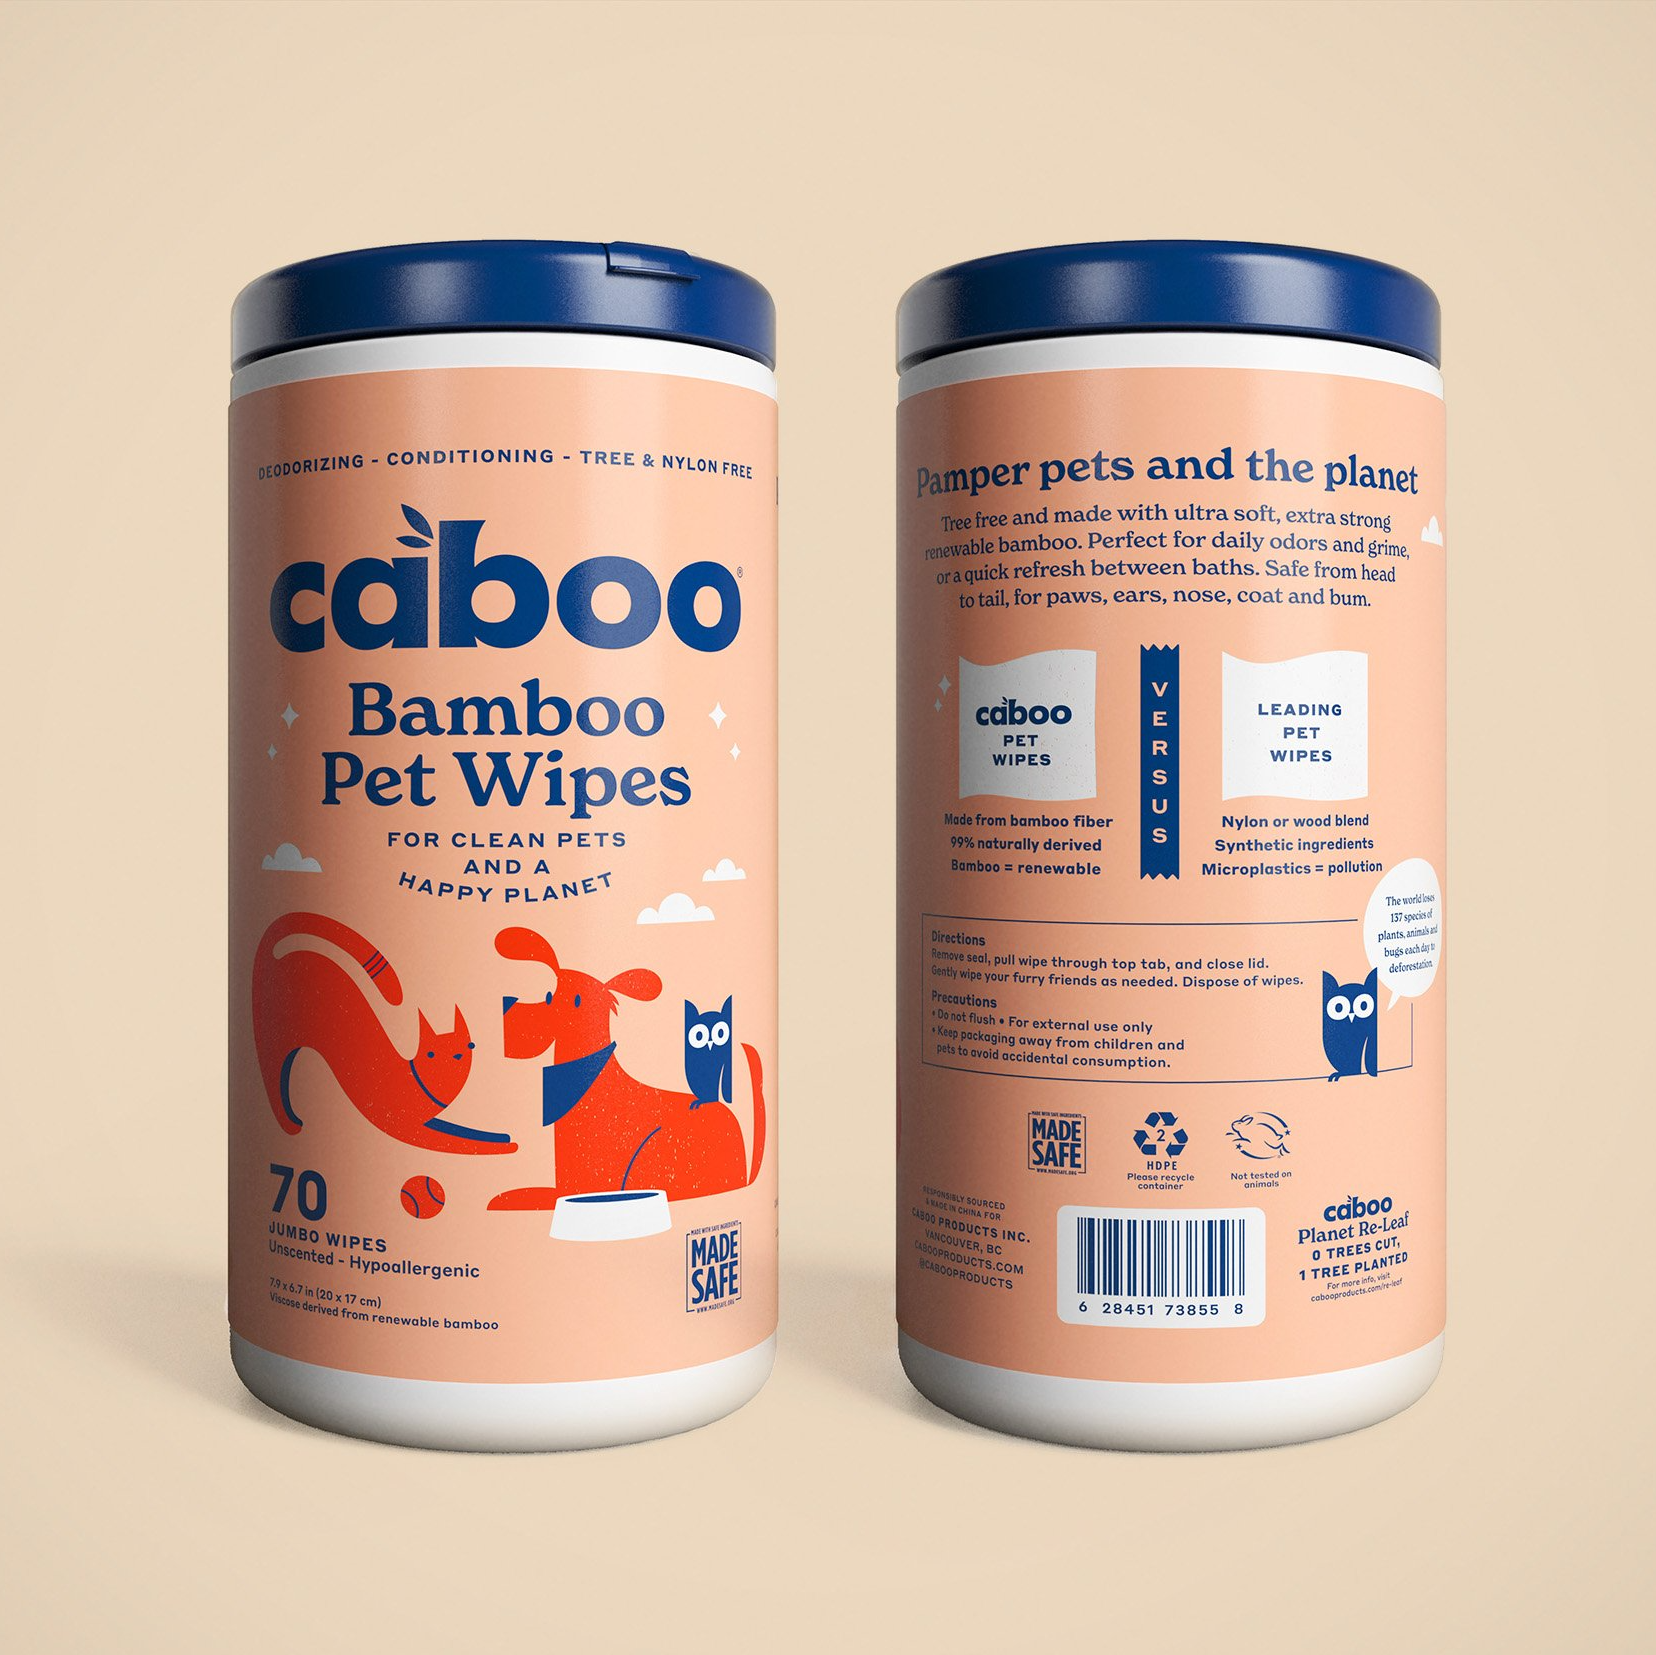 Caboo Bamboo Pet Wipes MADE SAFE